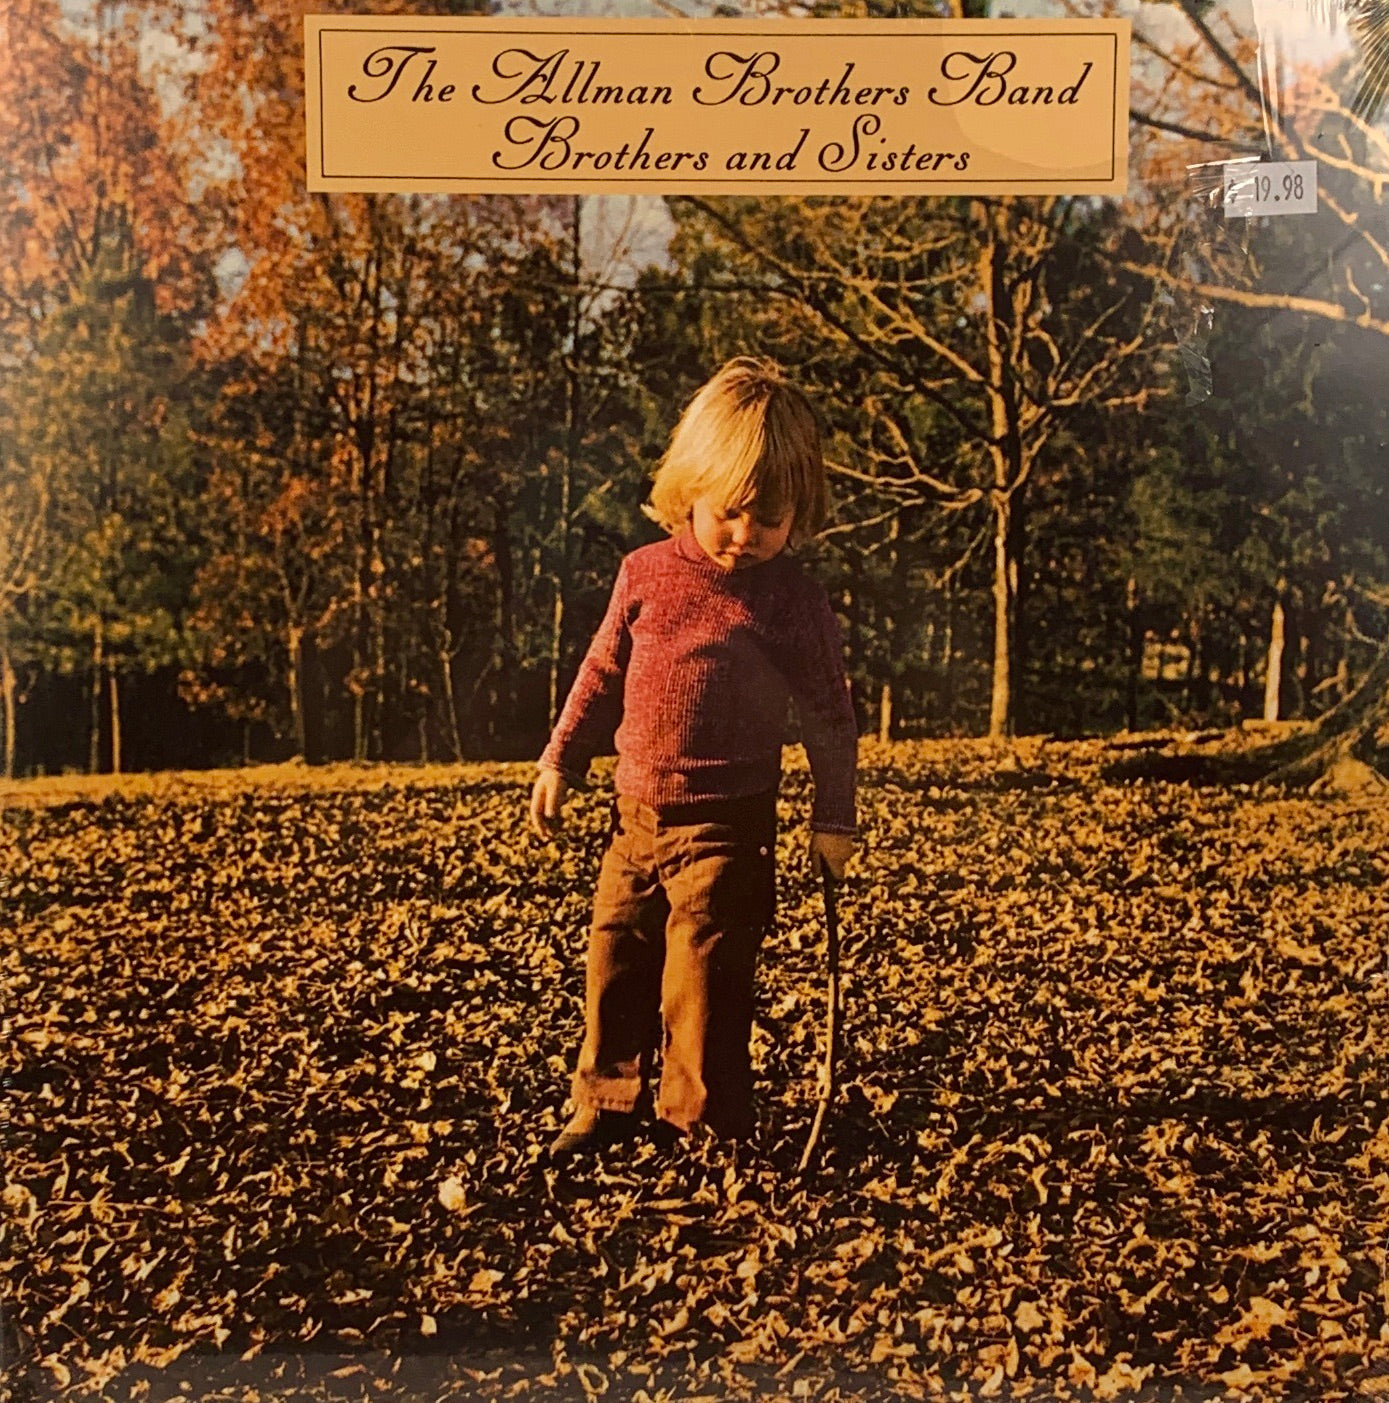 The Allman Brothers Band - Brothers and Sisters